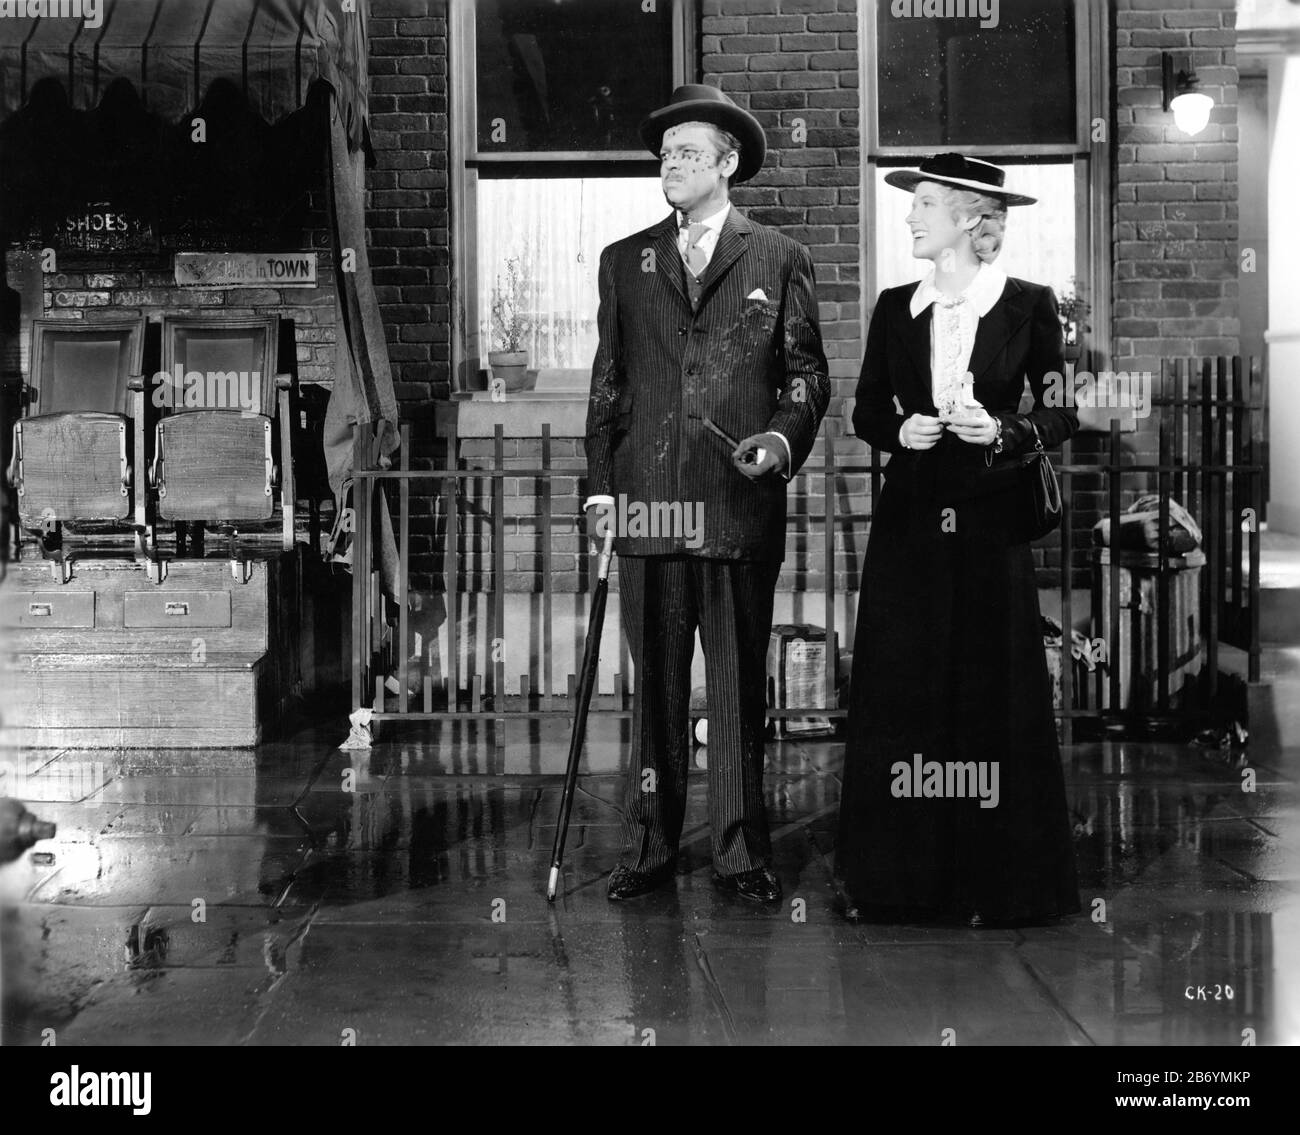 ORSON WELLES as Charles Foster Kane and DOROTHY COMINGORE as Susan Alexander in CITIZEN KANE 1941 director Orson Welles screenplay Herman J. Mankiewicz and Orson Welles music Bernard Herrmann Mercury Productions / RKO Radio Pictures Stock Photo